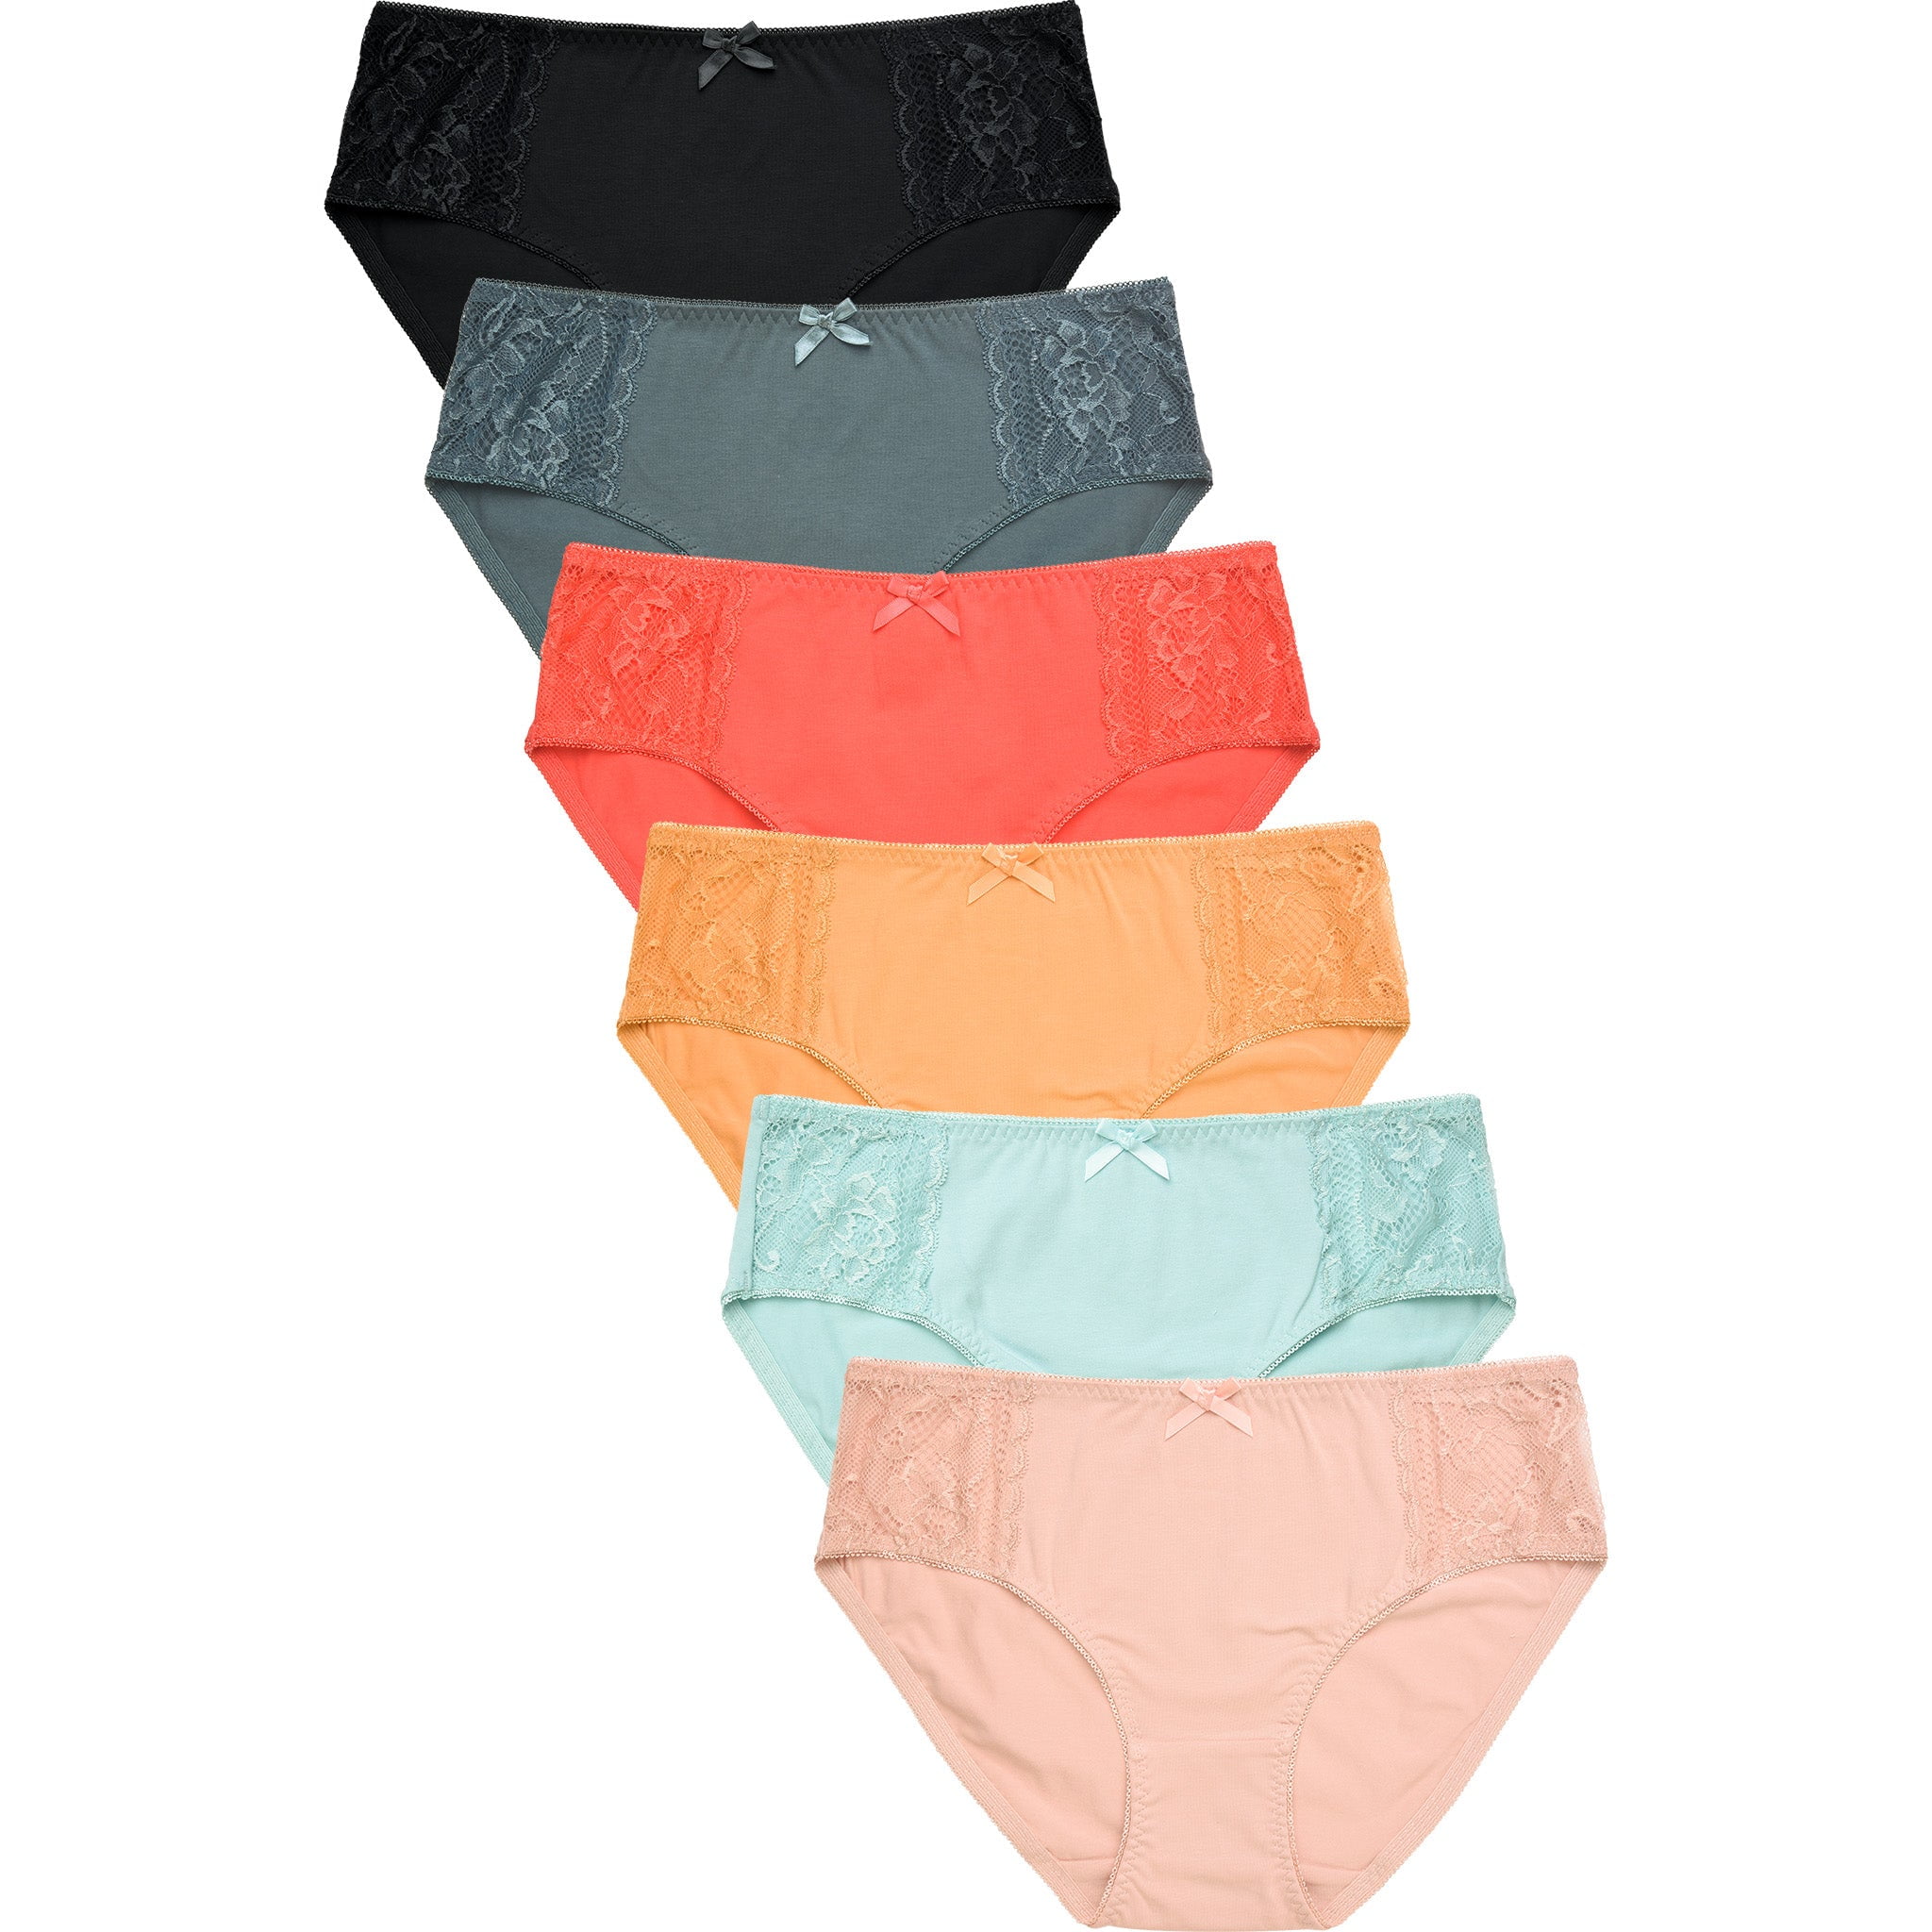 247 Frenzy Women's Essentials PACK OF 6 Cotton Stretch Brief Panty